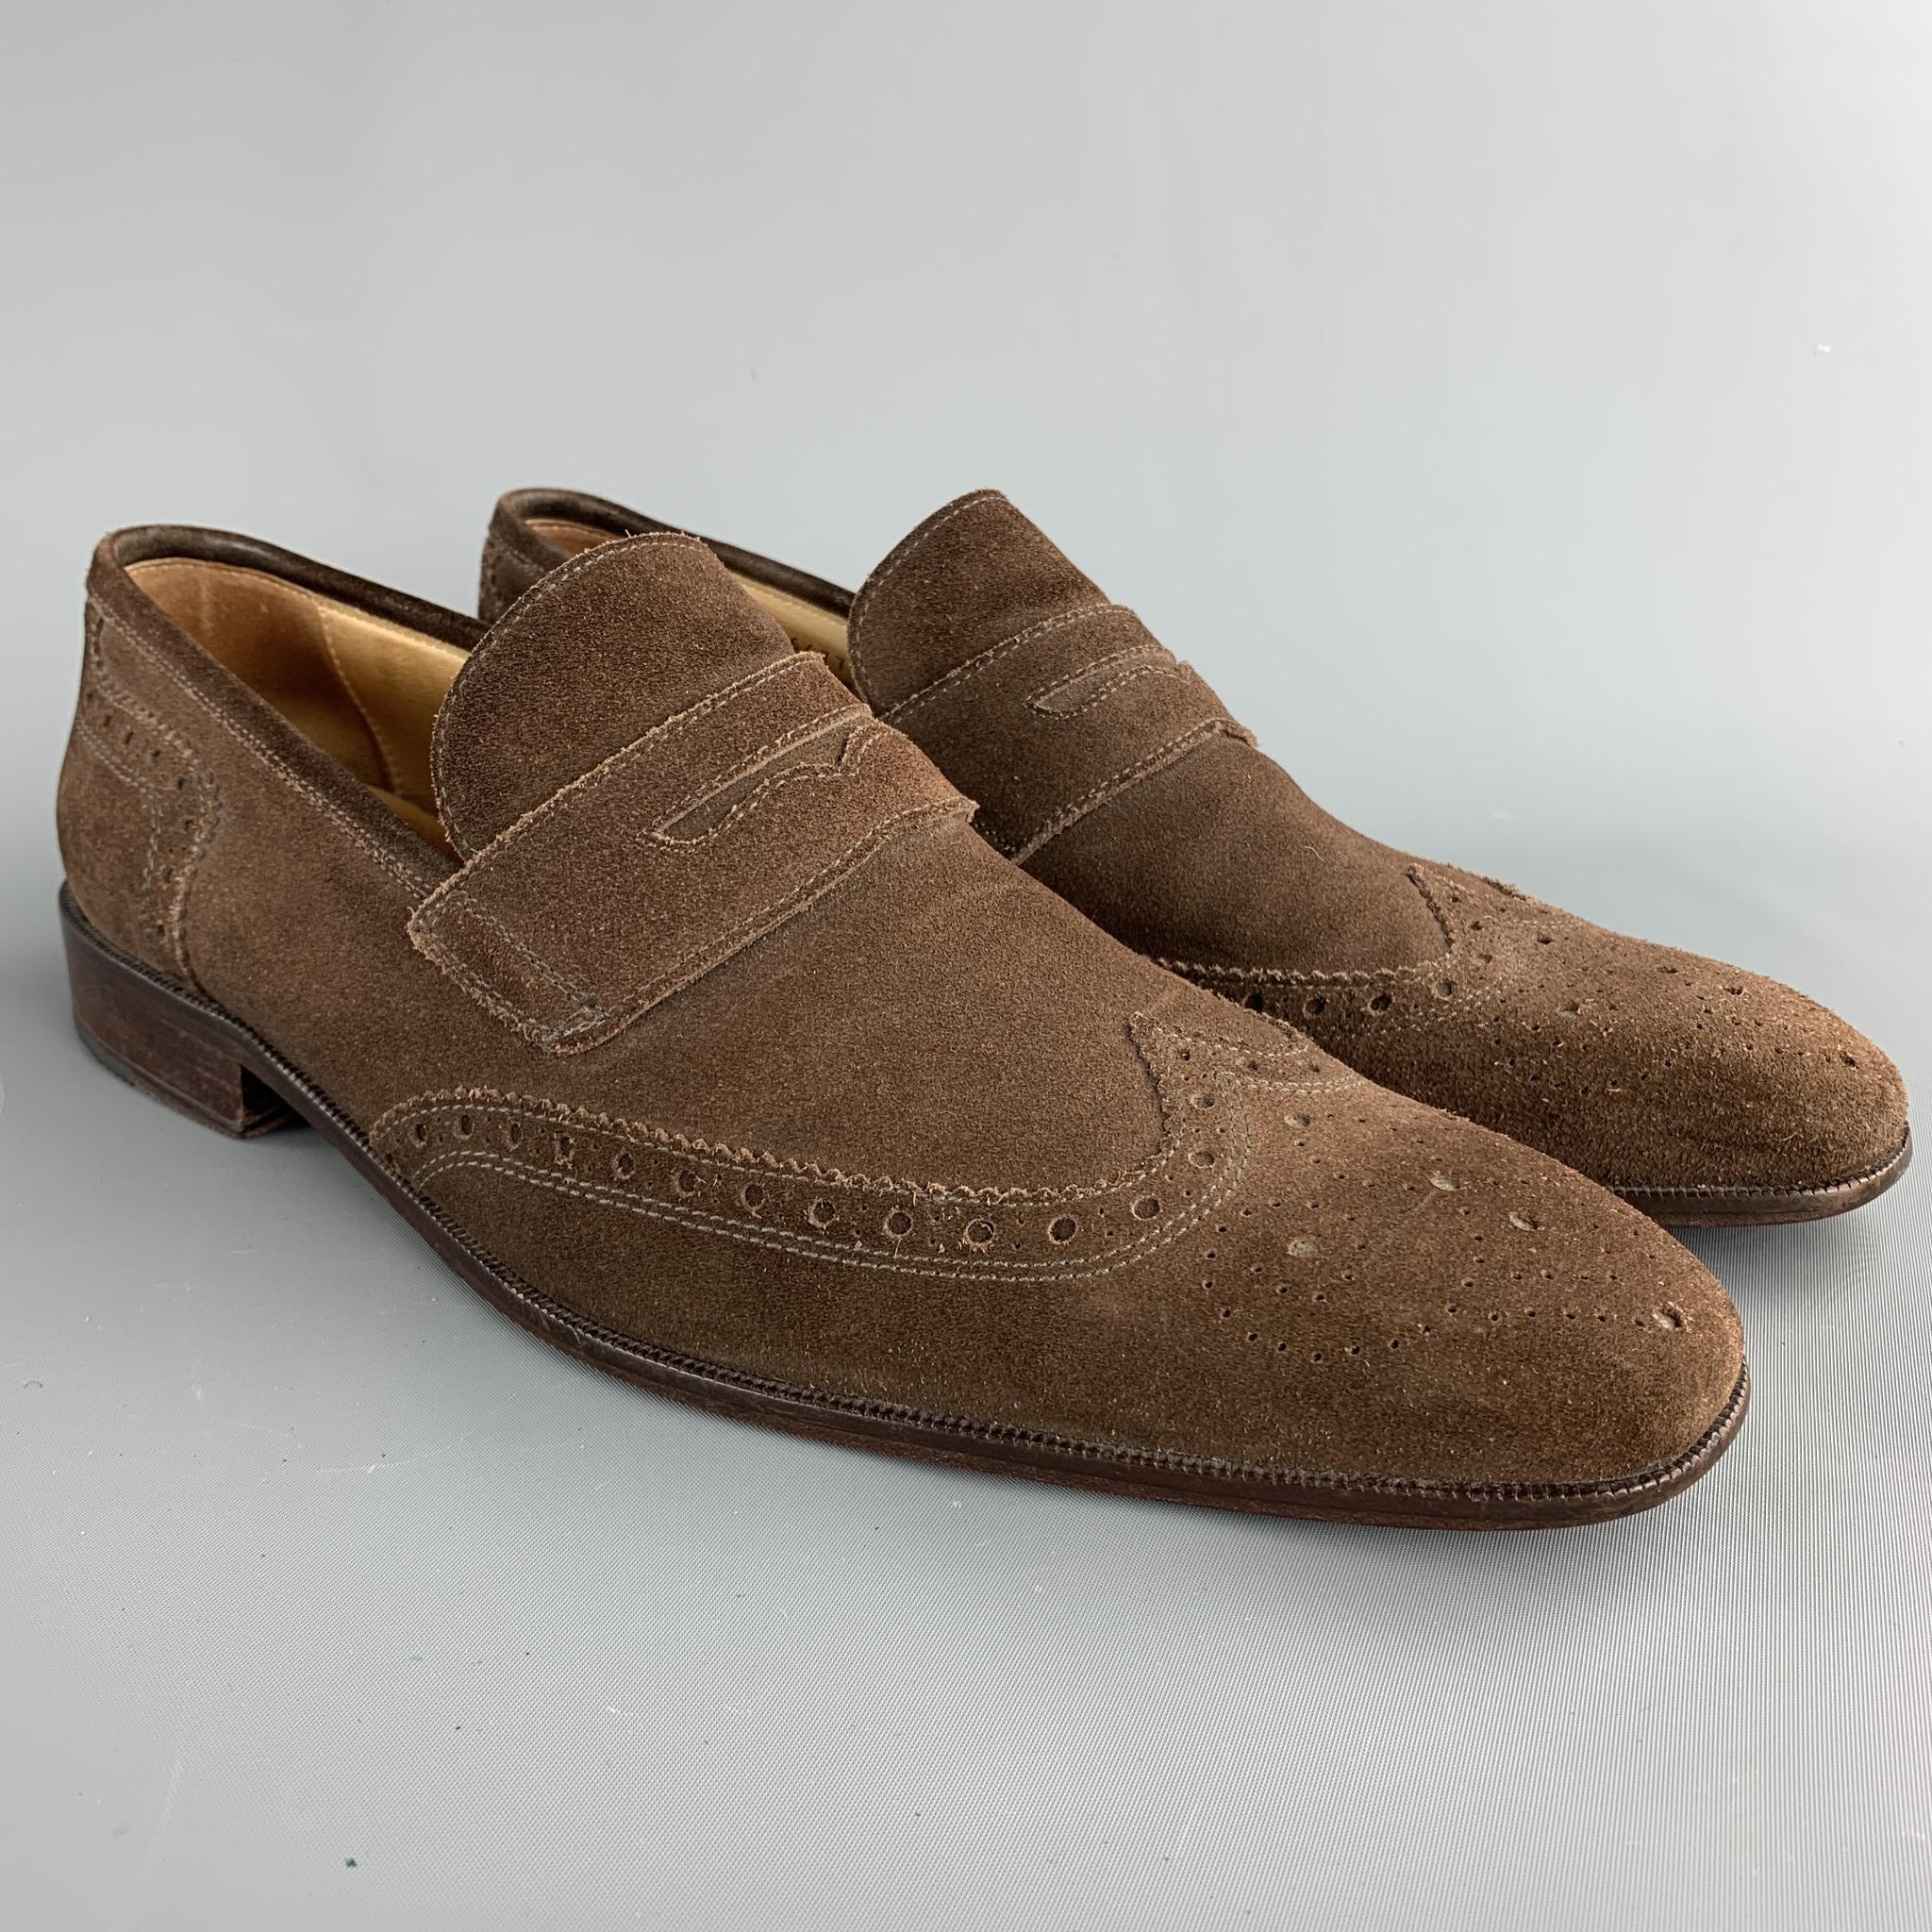 MERCANTI FIORENTINI loafers comes in a brown perforated suede featuring a wingtip, penny strap, and a wooden sole. Made in Italy.  

Excellent Pre-Owned Condition.
Marked: 12 M

Outsole:

13 in. x 4 in. 

SKU: 75330
Category: Loafers

More